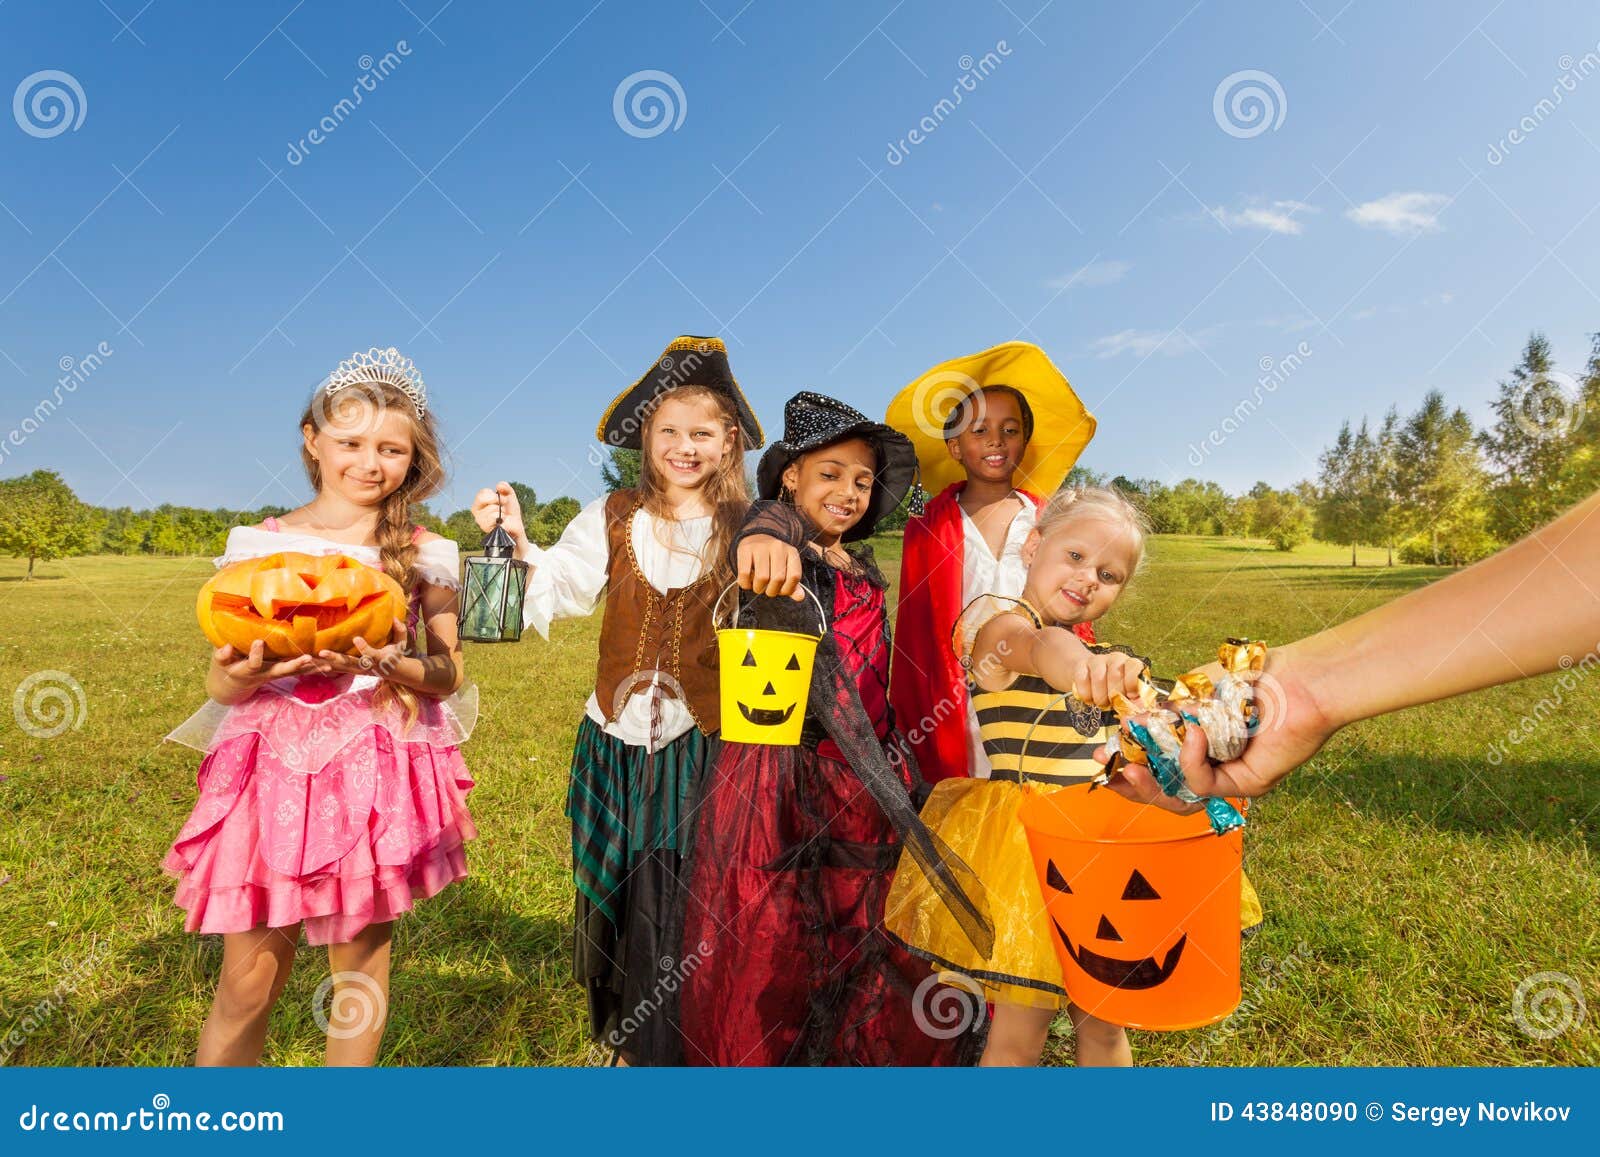 Children in Costumes Look at Hand with Sweets Stock Photo - Image of ...